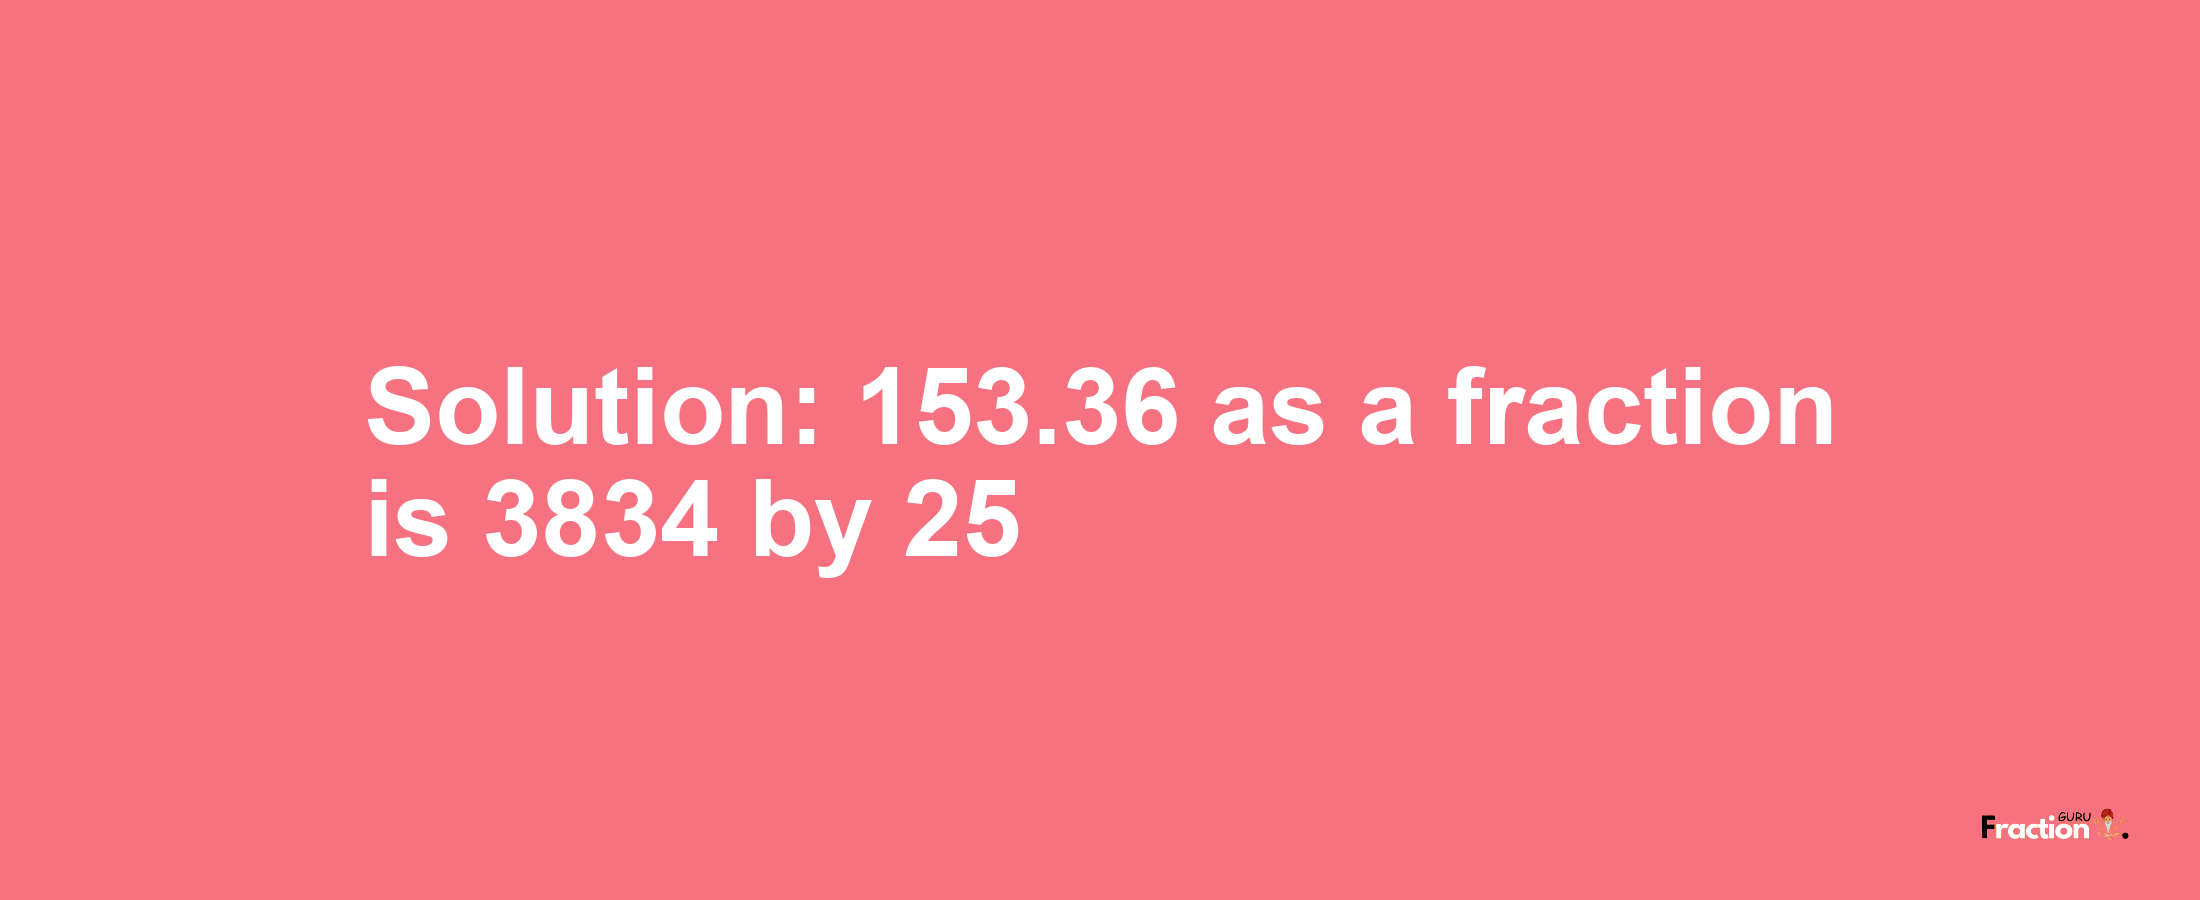 Solution:153.36 as a fraction is 3834/25